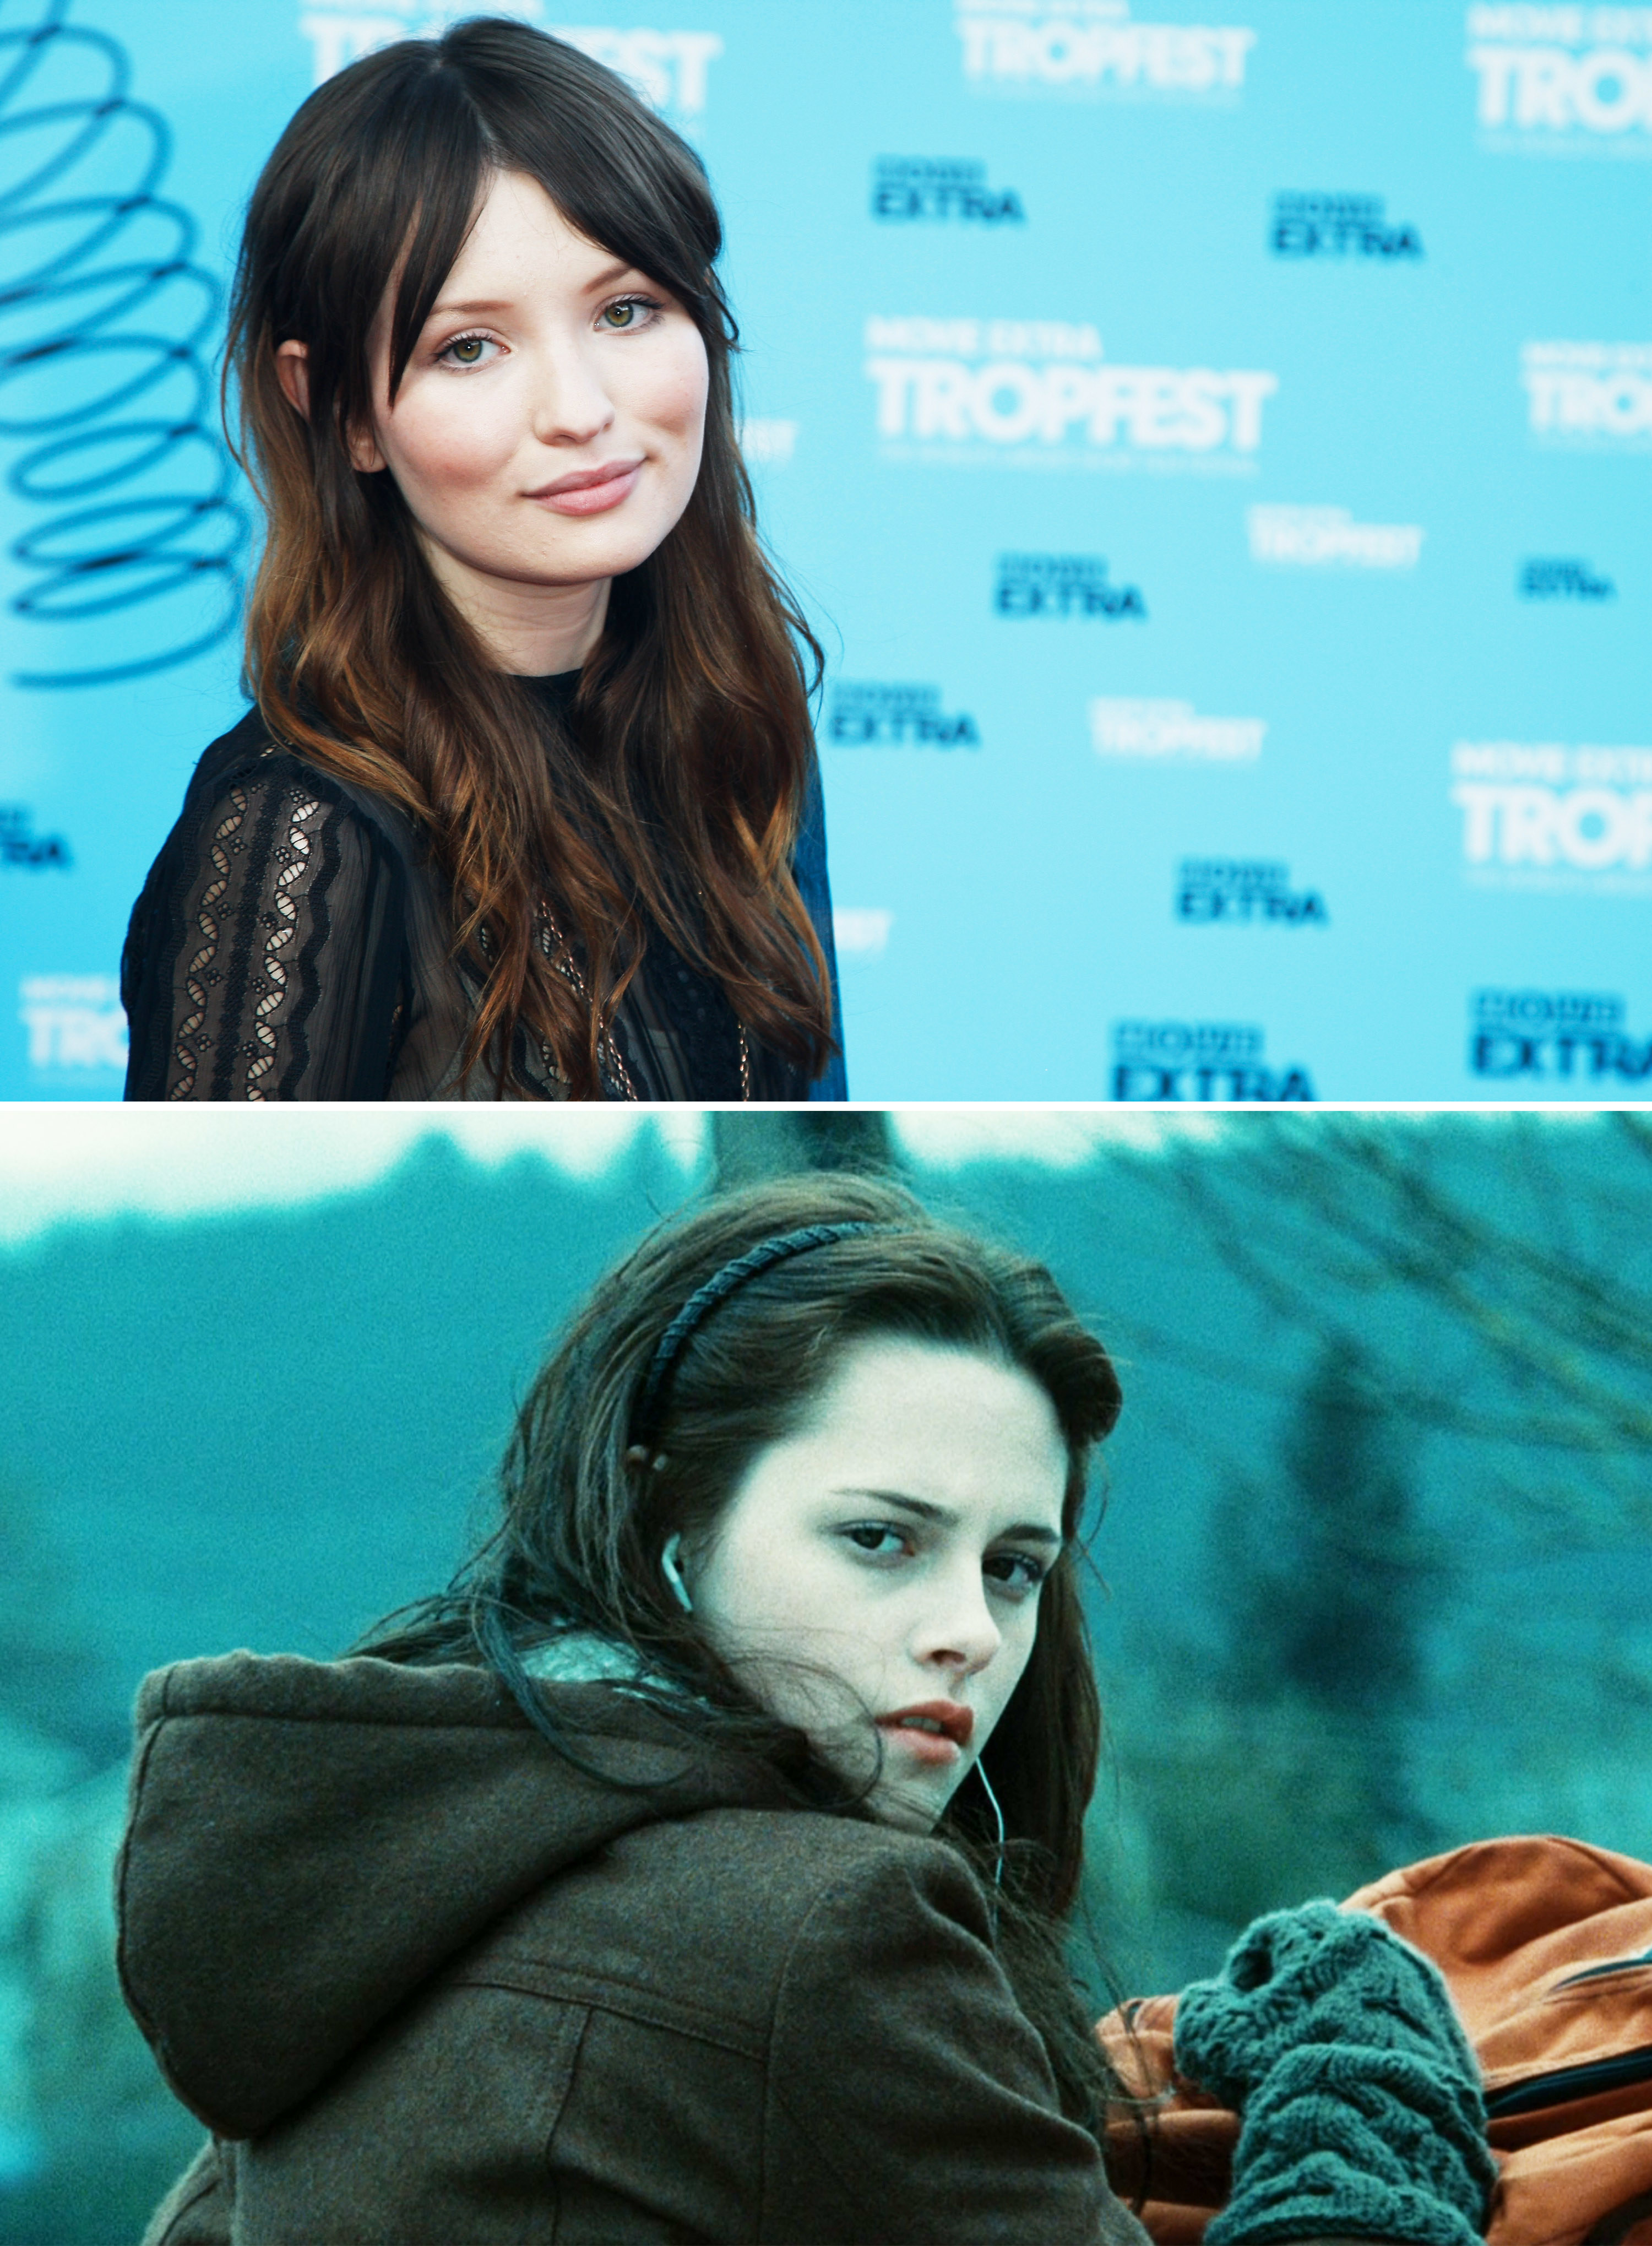 A close-up of Emily Browning above a shot of Kristen Stewart as Bella in Twilight